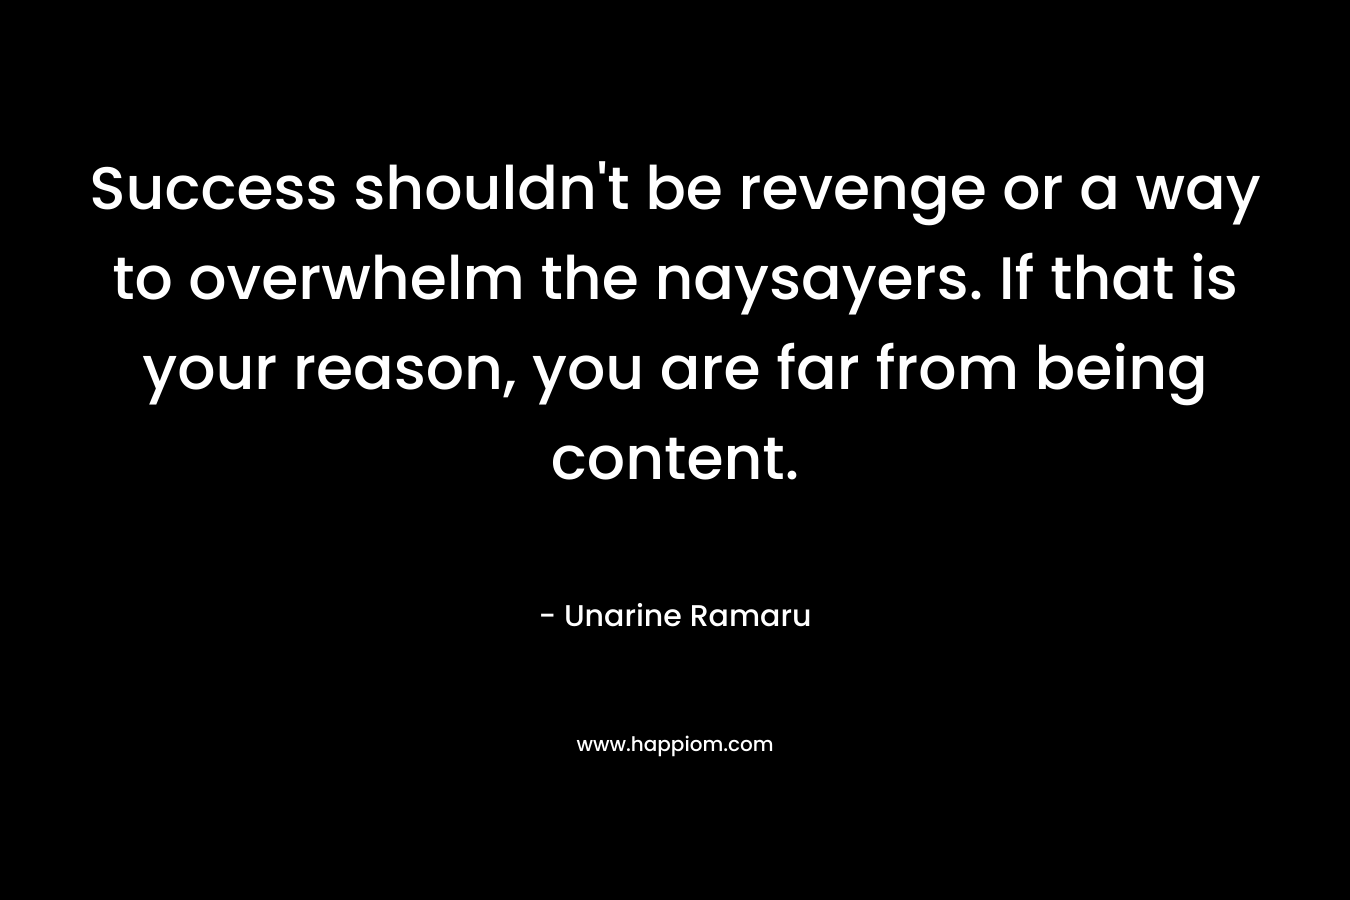 Success shouldn't be revenge or a way to overwhelm the naysayers. If that is your reason, you are far from being content.